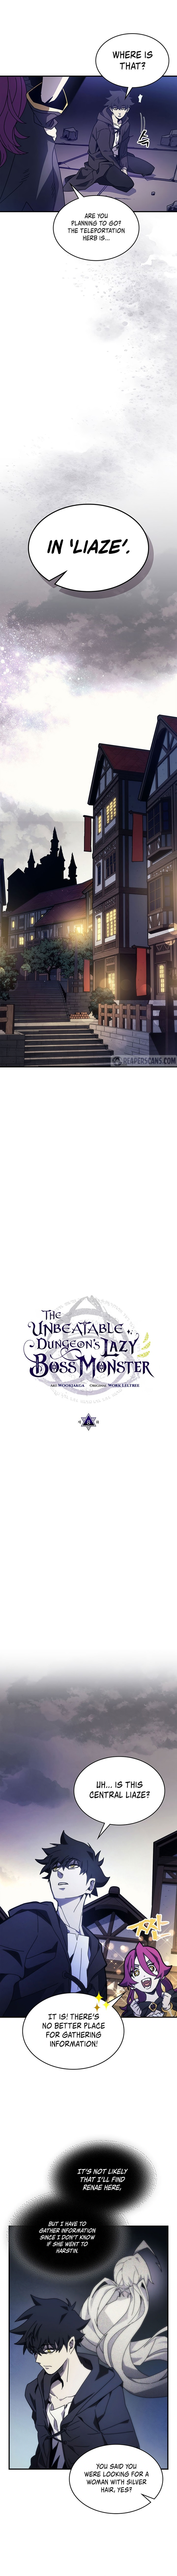 The Unbeatable Dungeons Lazy Boss Monster 8 1